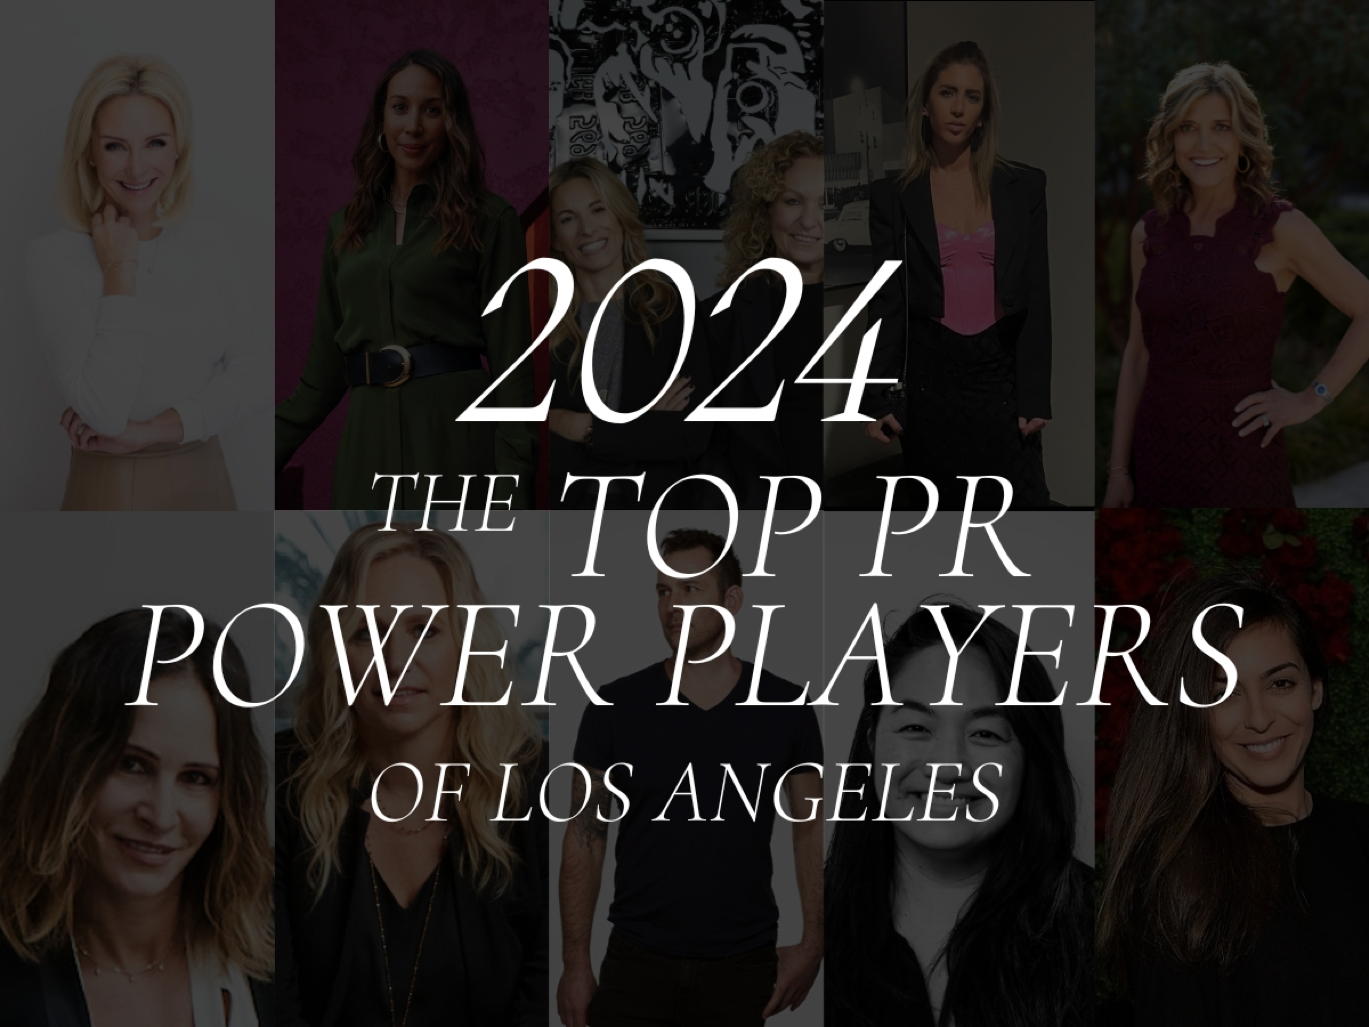 The Top 10 PR Power Players In Los Angeles